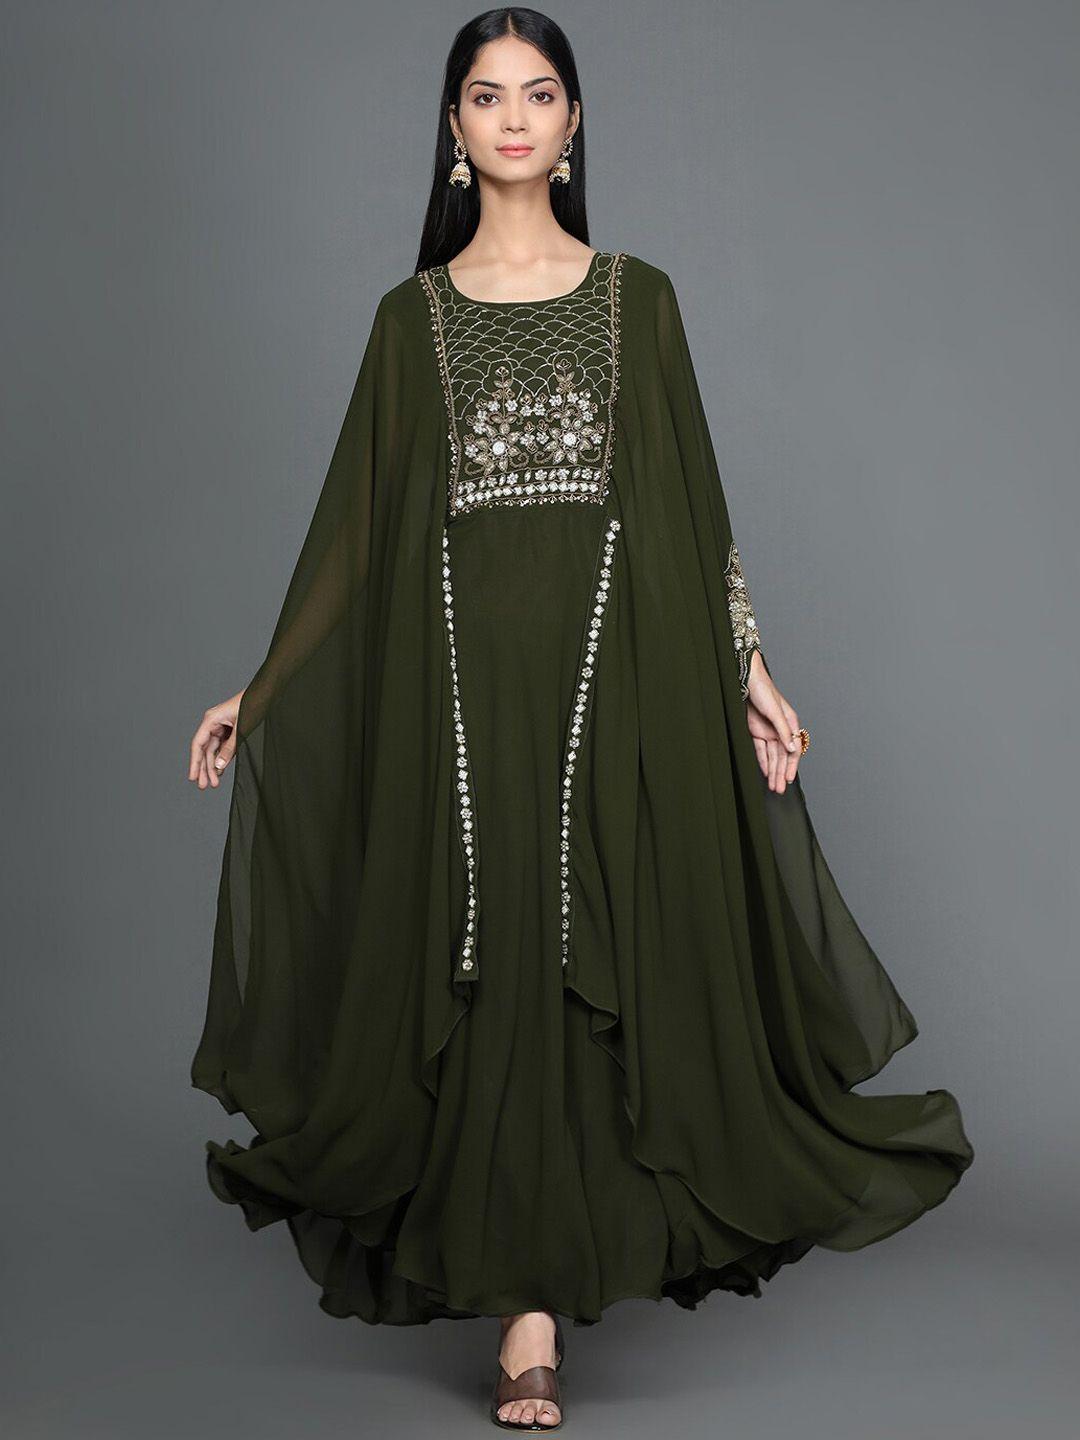 kalini-embroidered-beads-&-stones-batwing-sleeves-georgette-fit-&-flared-maxi-ethnic-dress